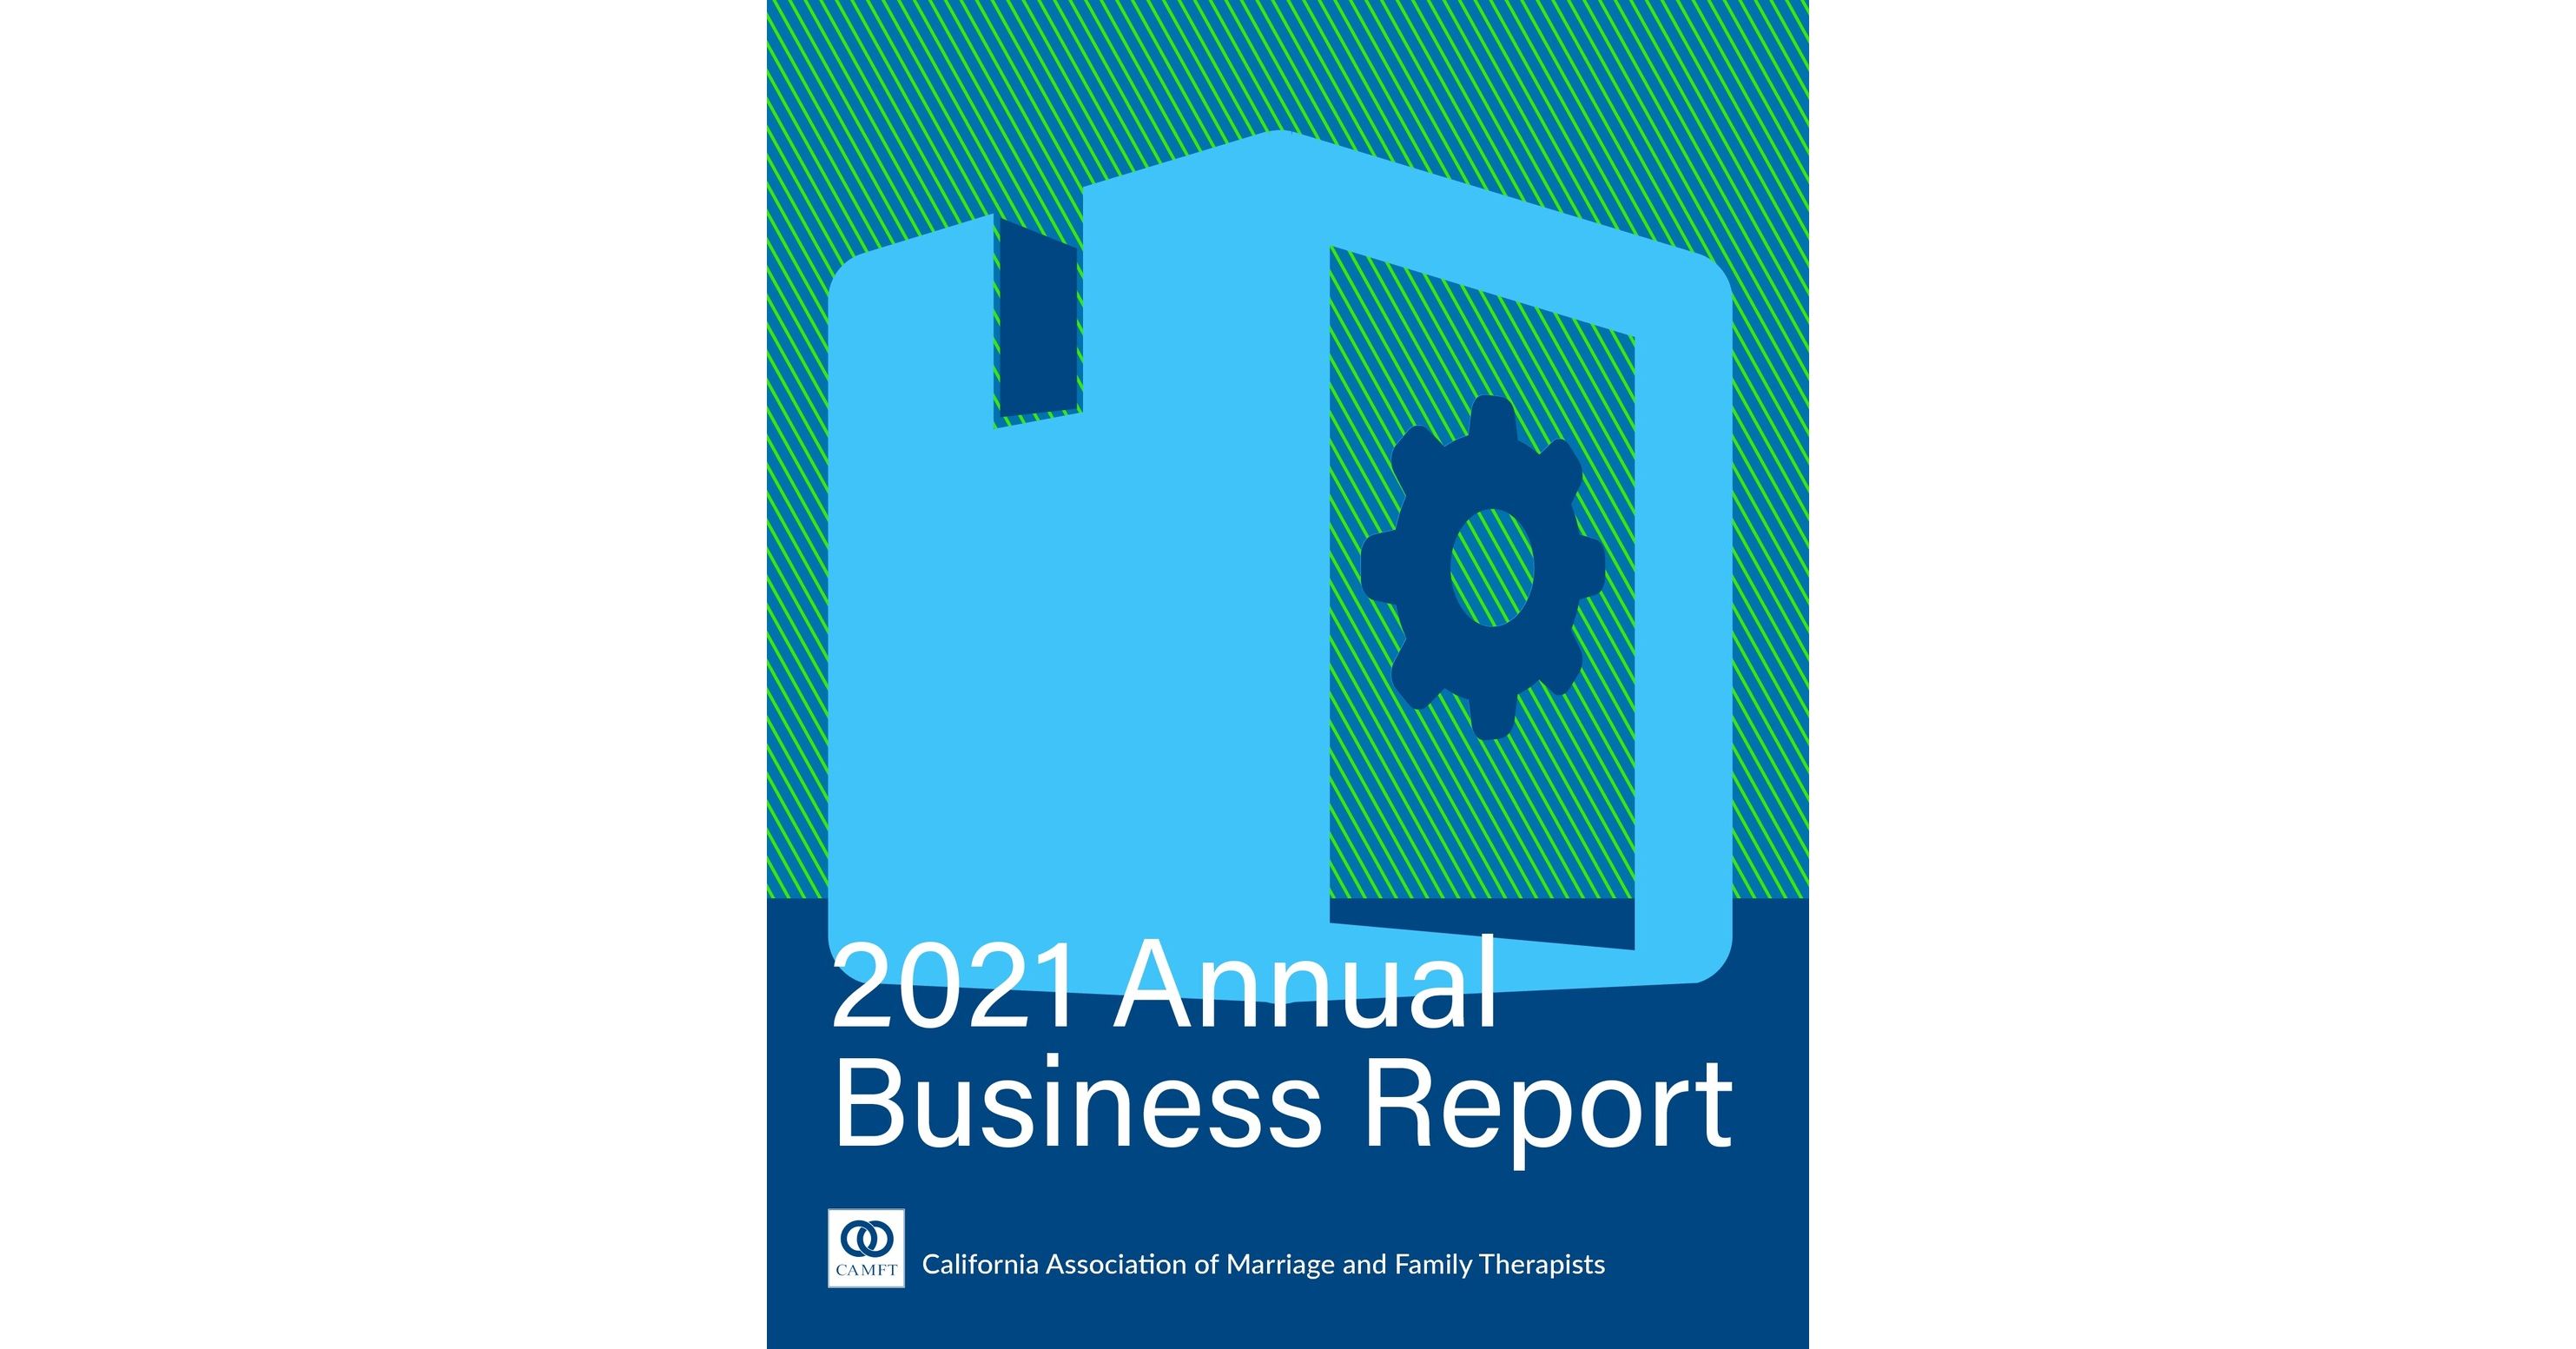 2021 Annual Business Report v2